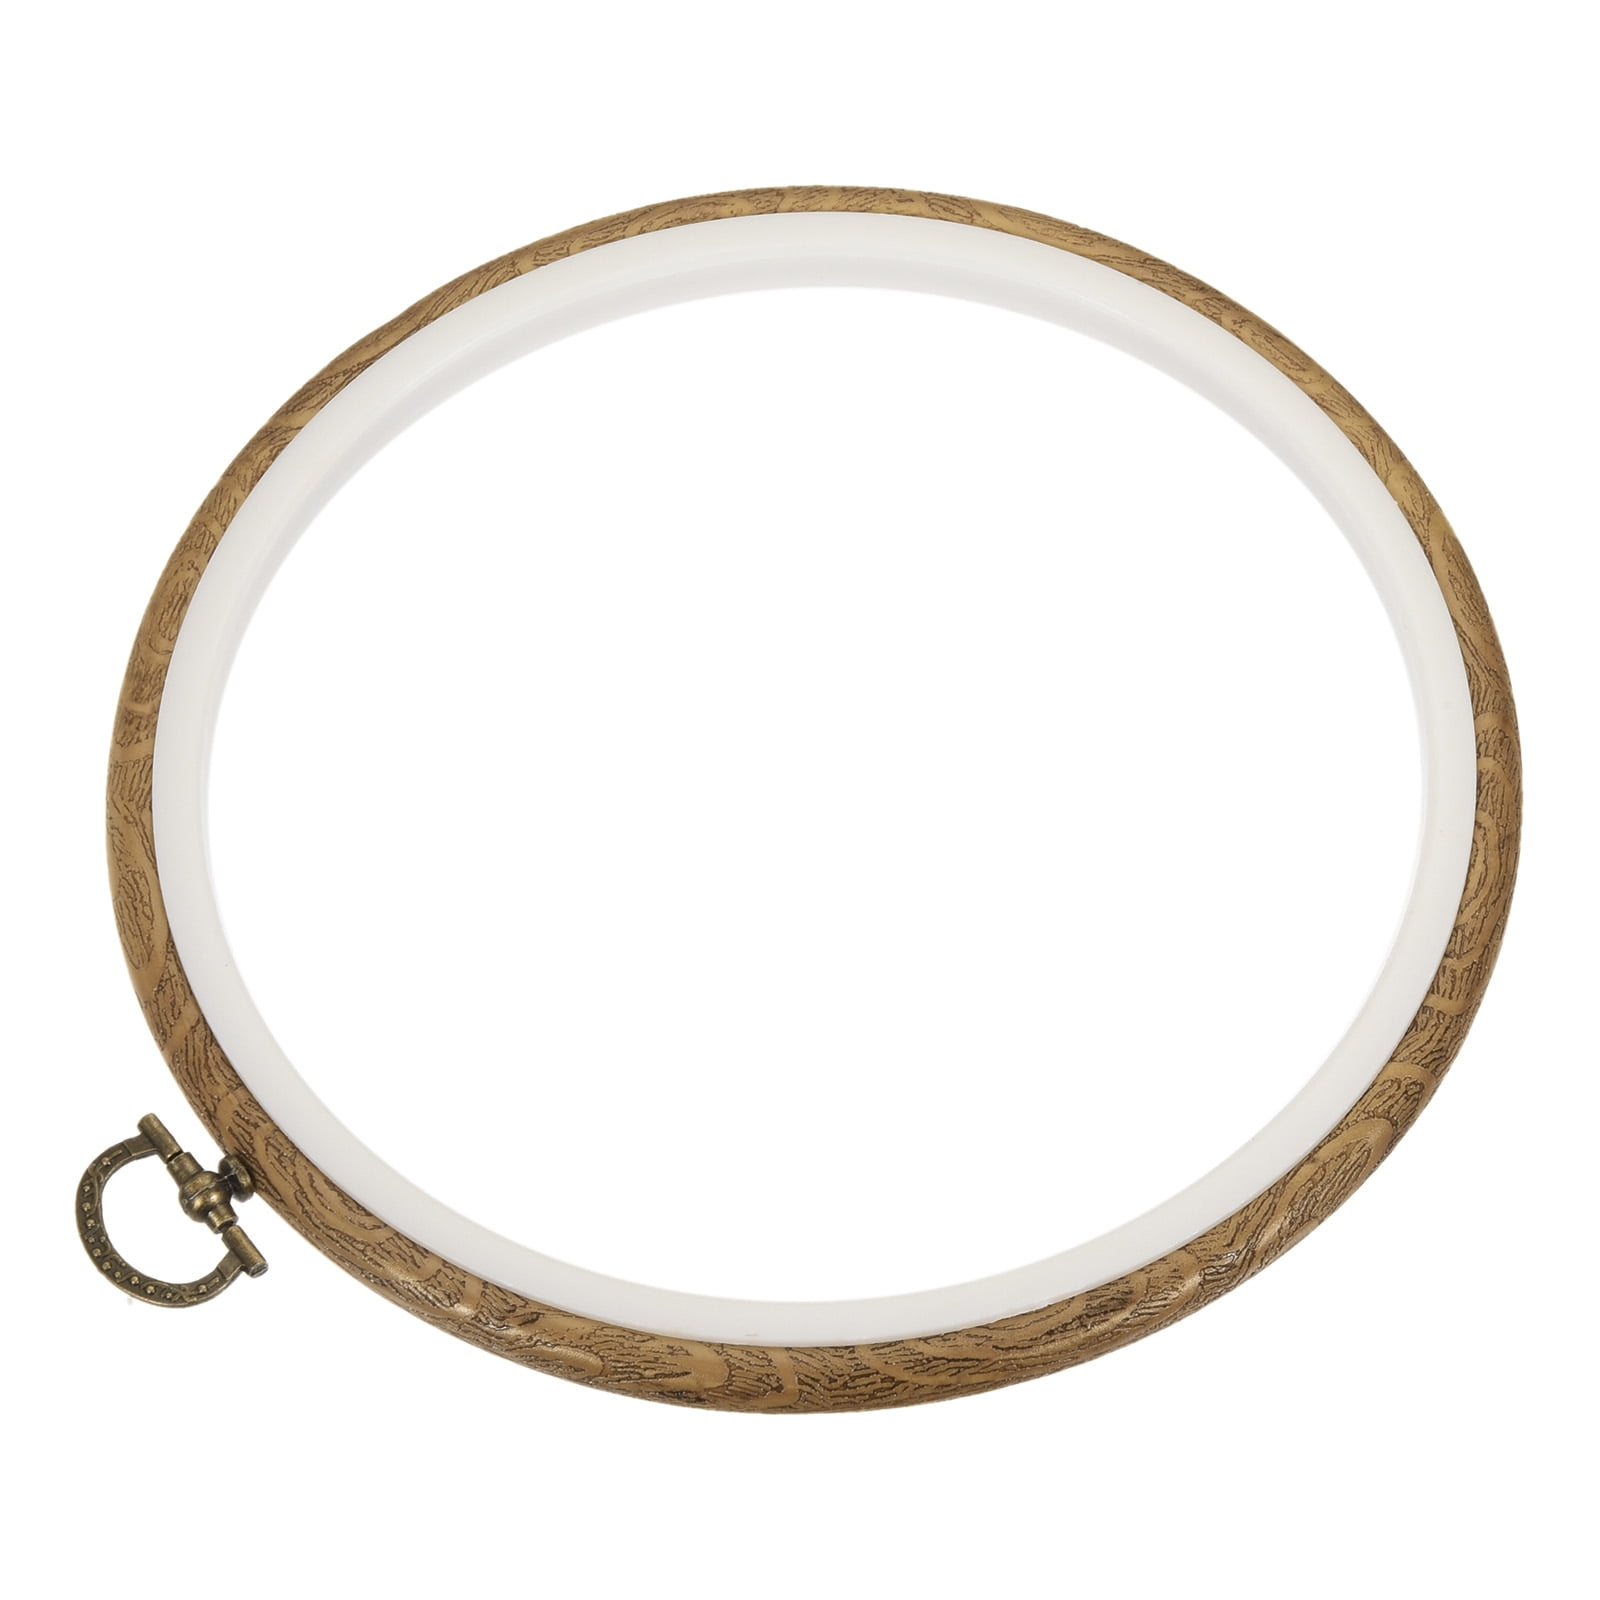 Embroidery Hoop Frame Kit Round Imitated Wood Circle Cross-Stitch Ring for Art Craft Sewing Ornament | Harfington, 3.5,6 / 2pcs